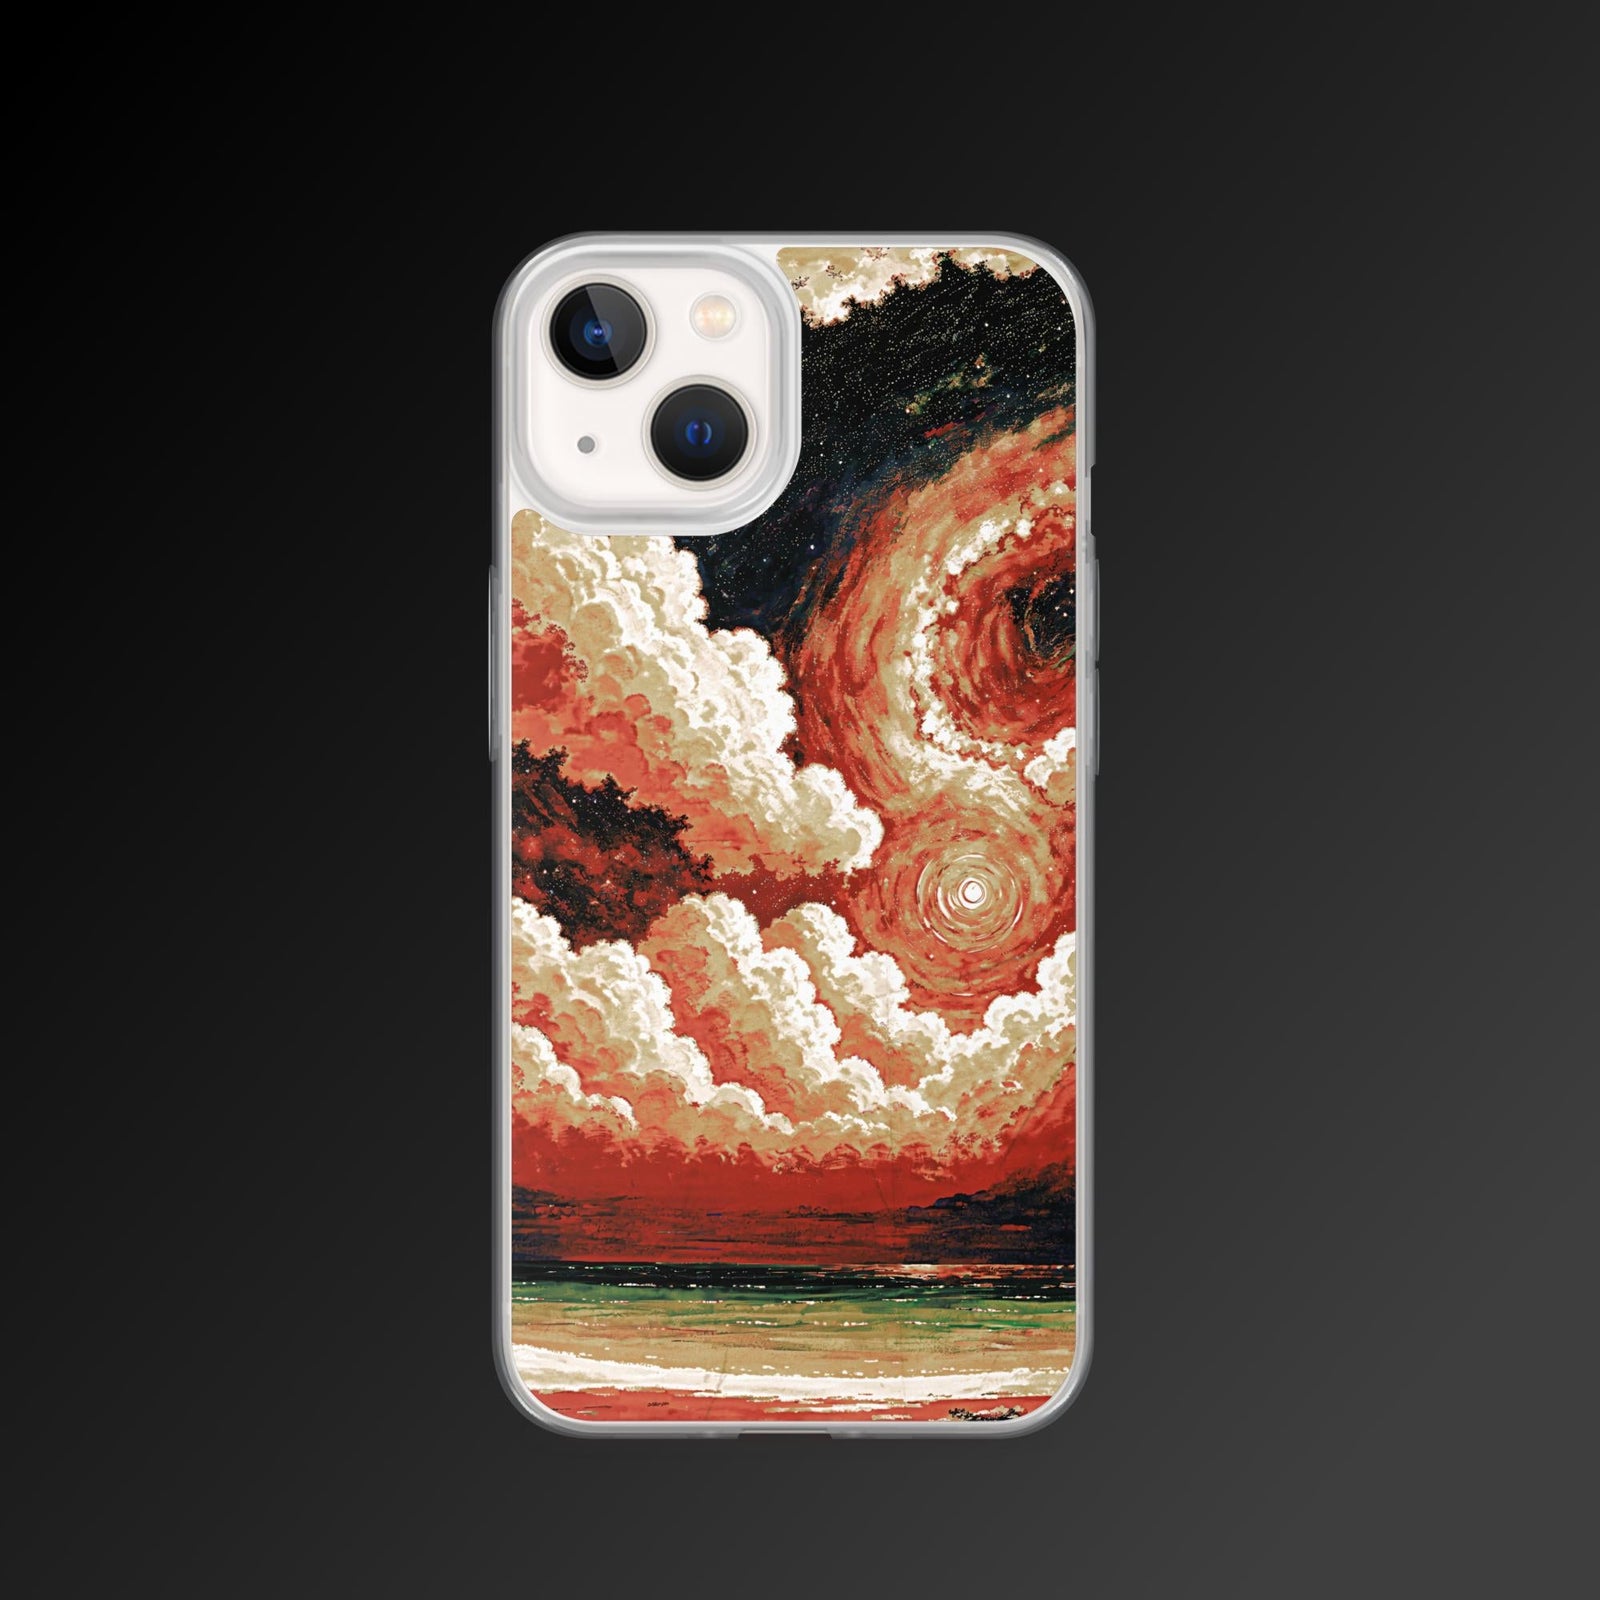 "Sinister vortex" clear iphone case - Clear iphone case - Ever colorful